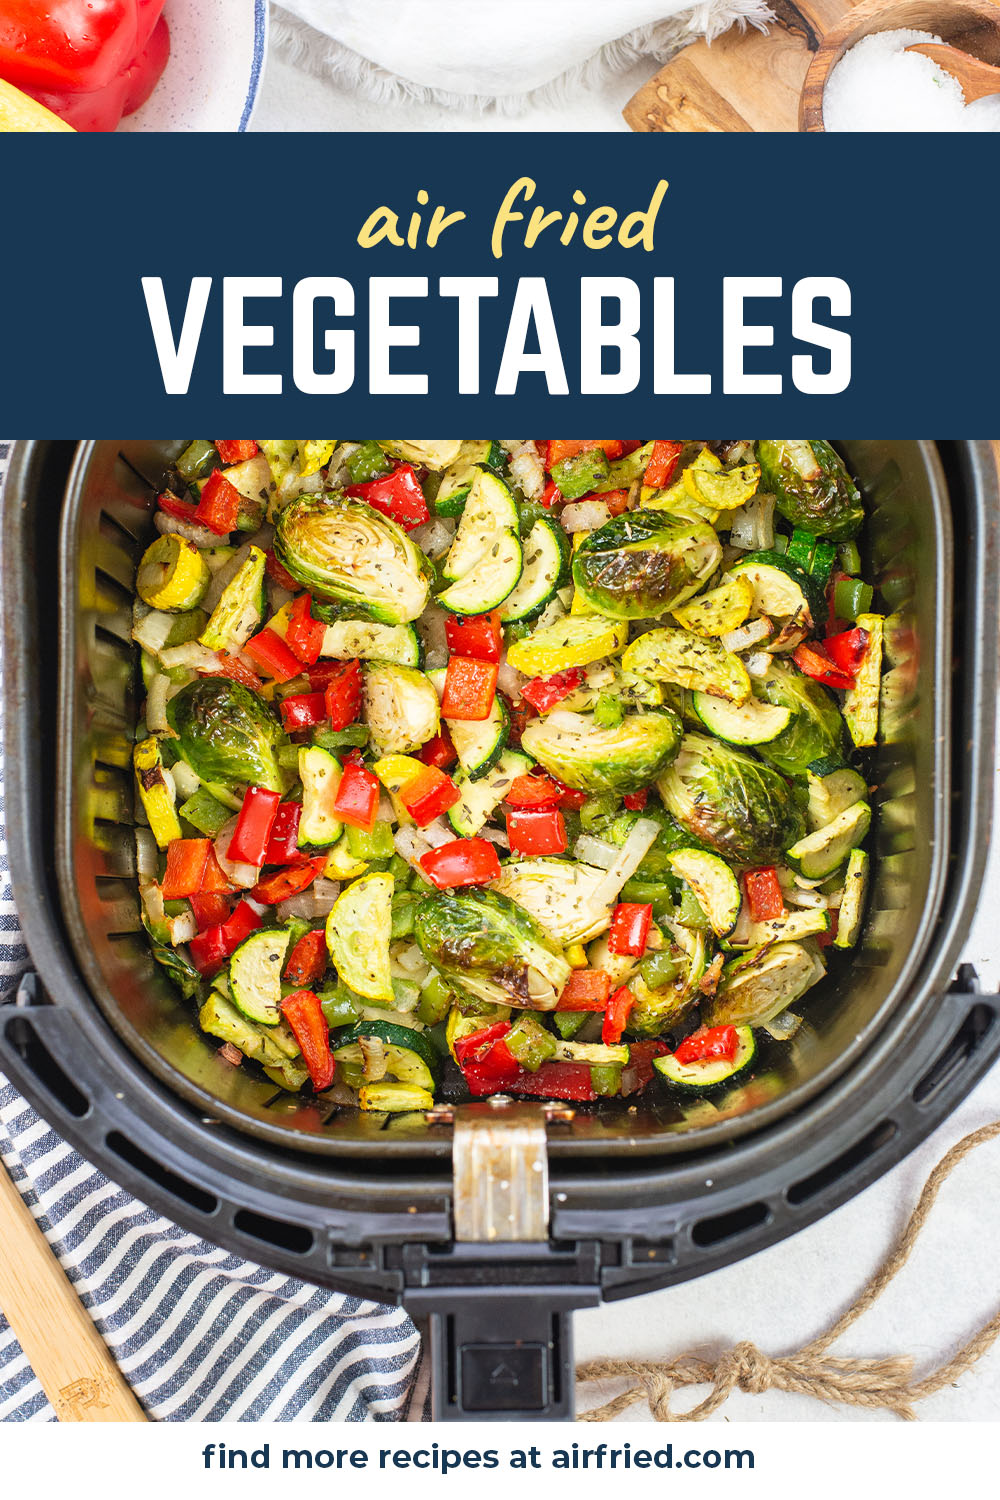 Cooking all of these vegetables together in the air fryer makes for an amazing side dish!  